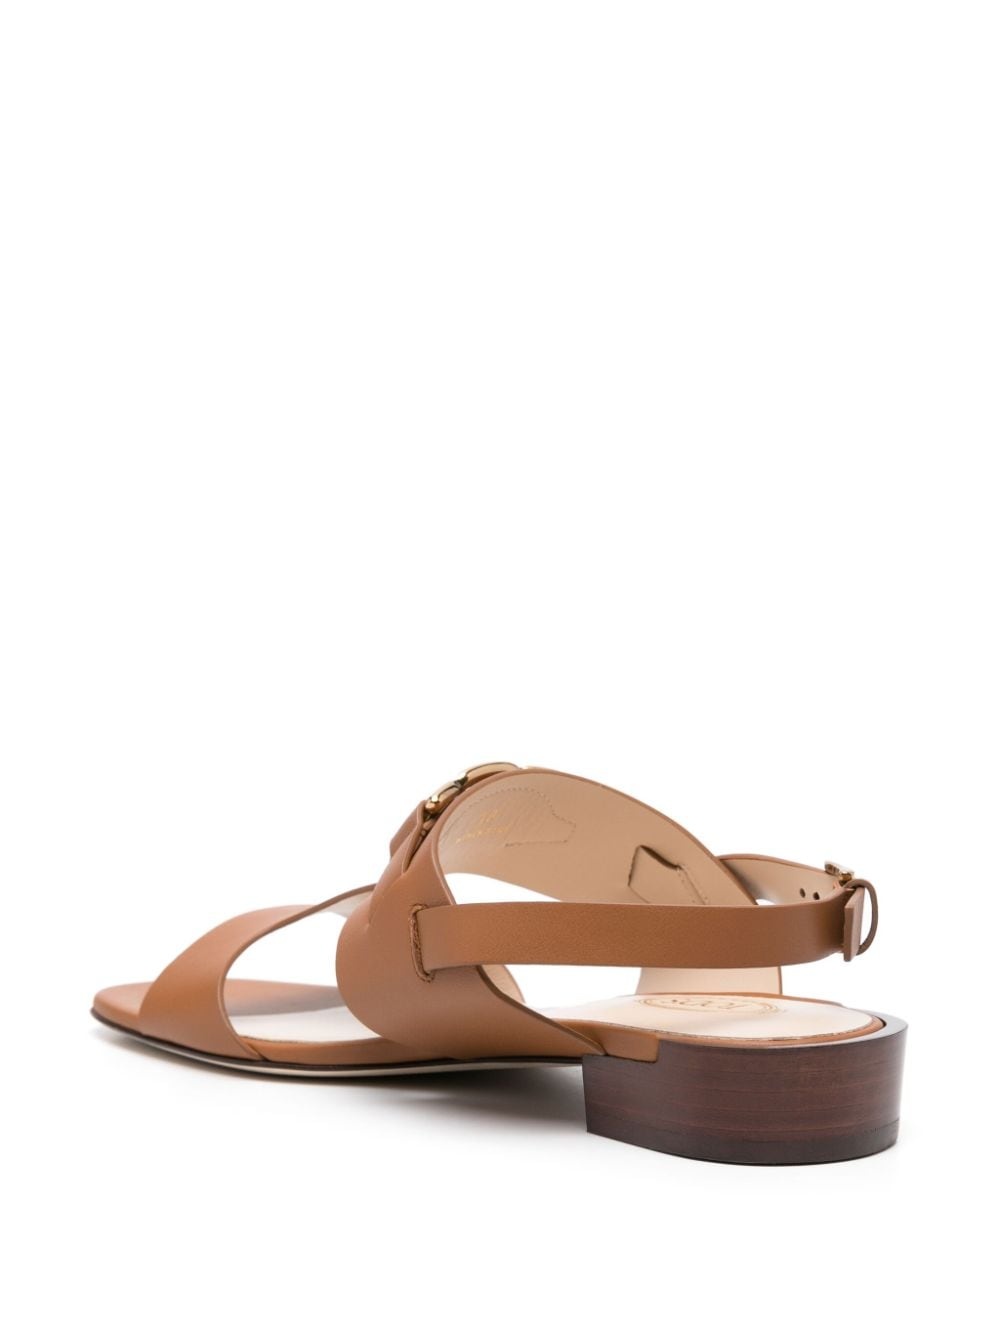 Kate leather sandals - 3